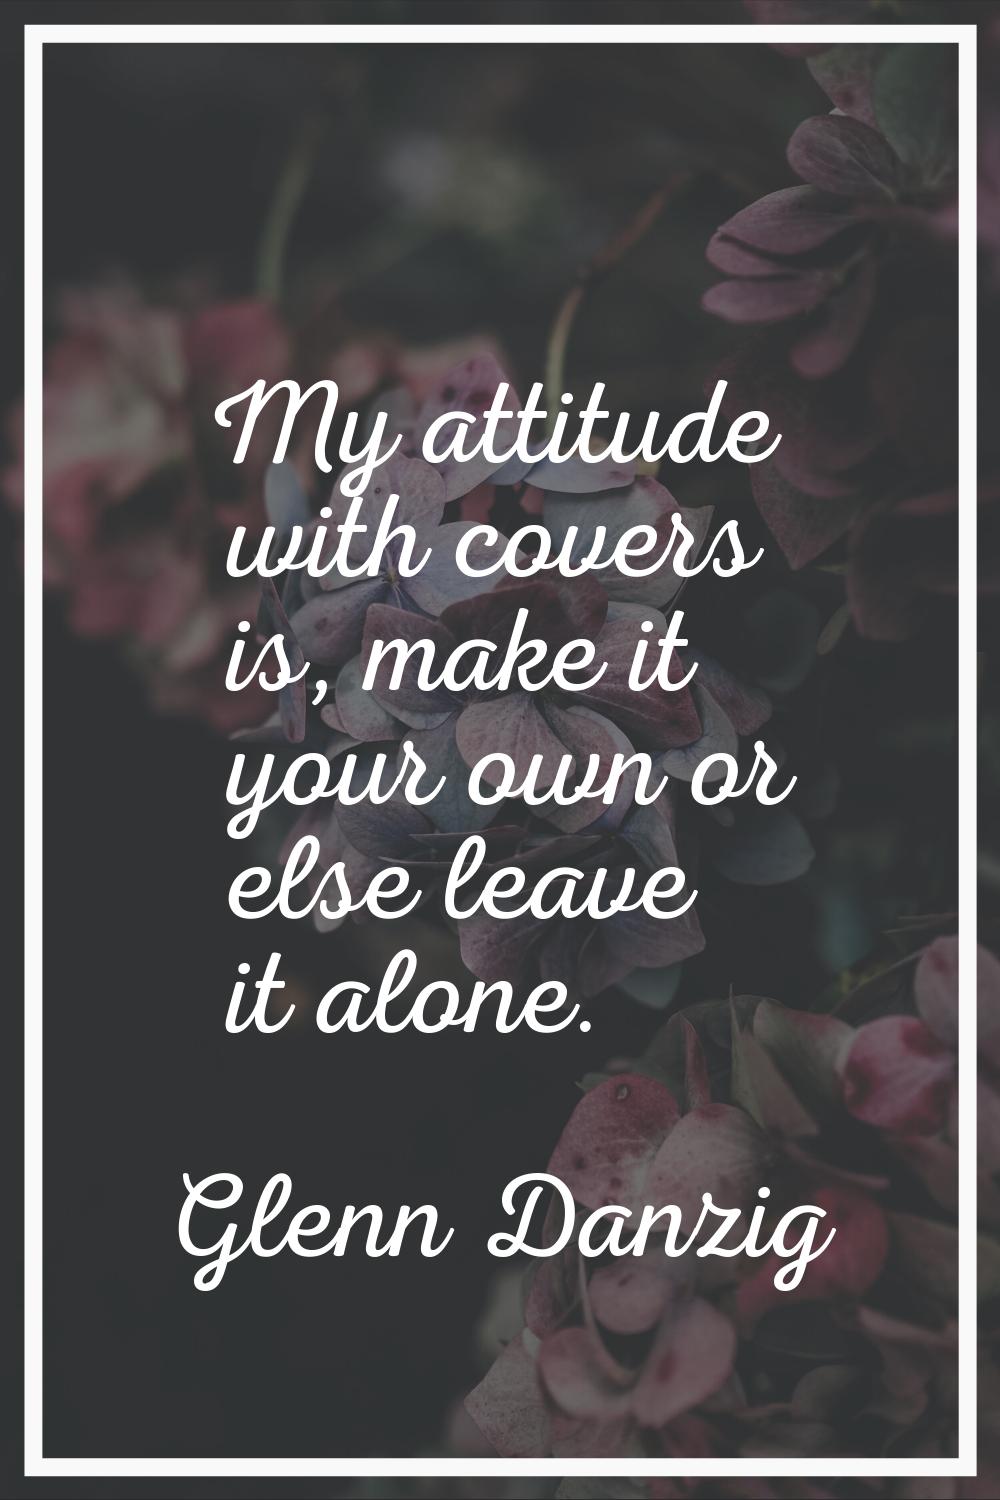 My attitude with covers is, make it your own or else leave it alone.